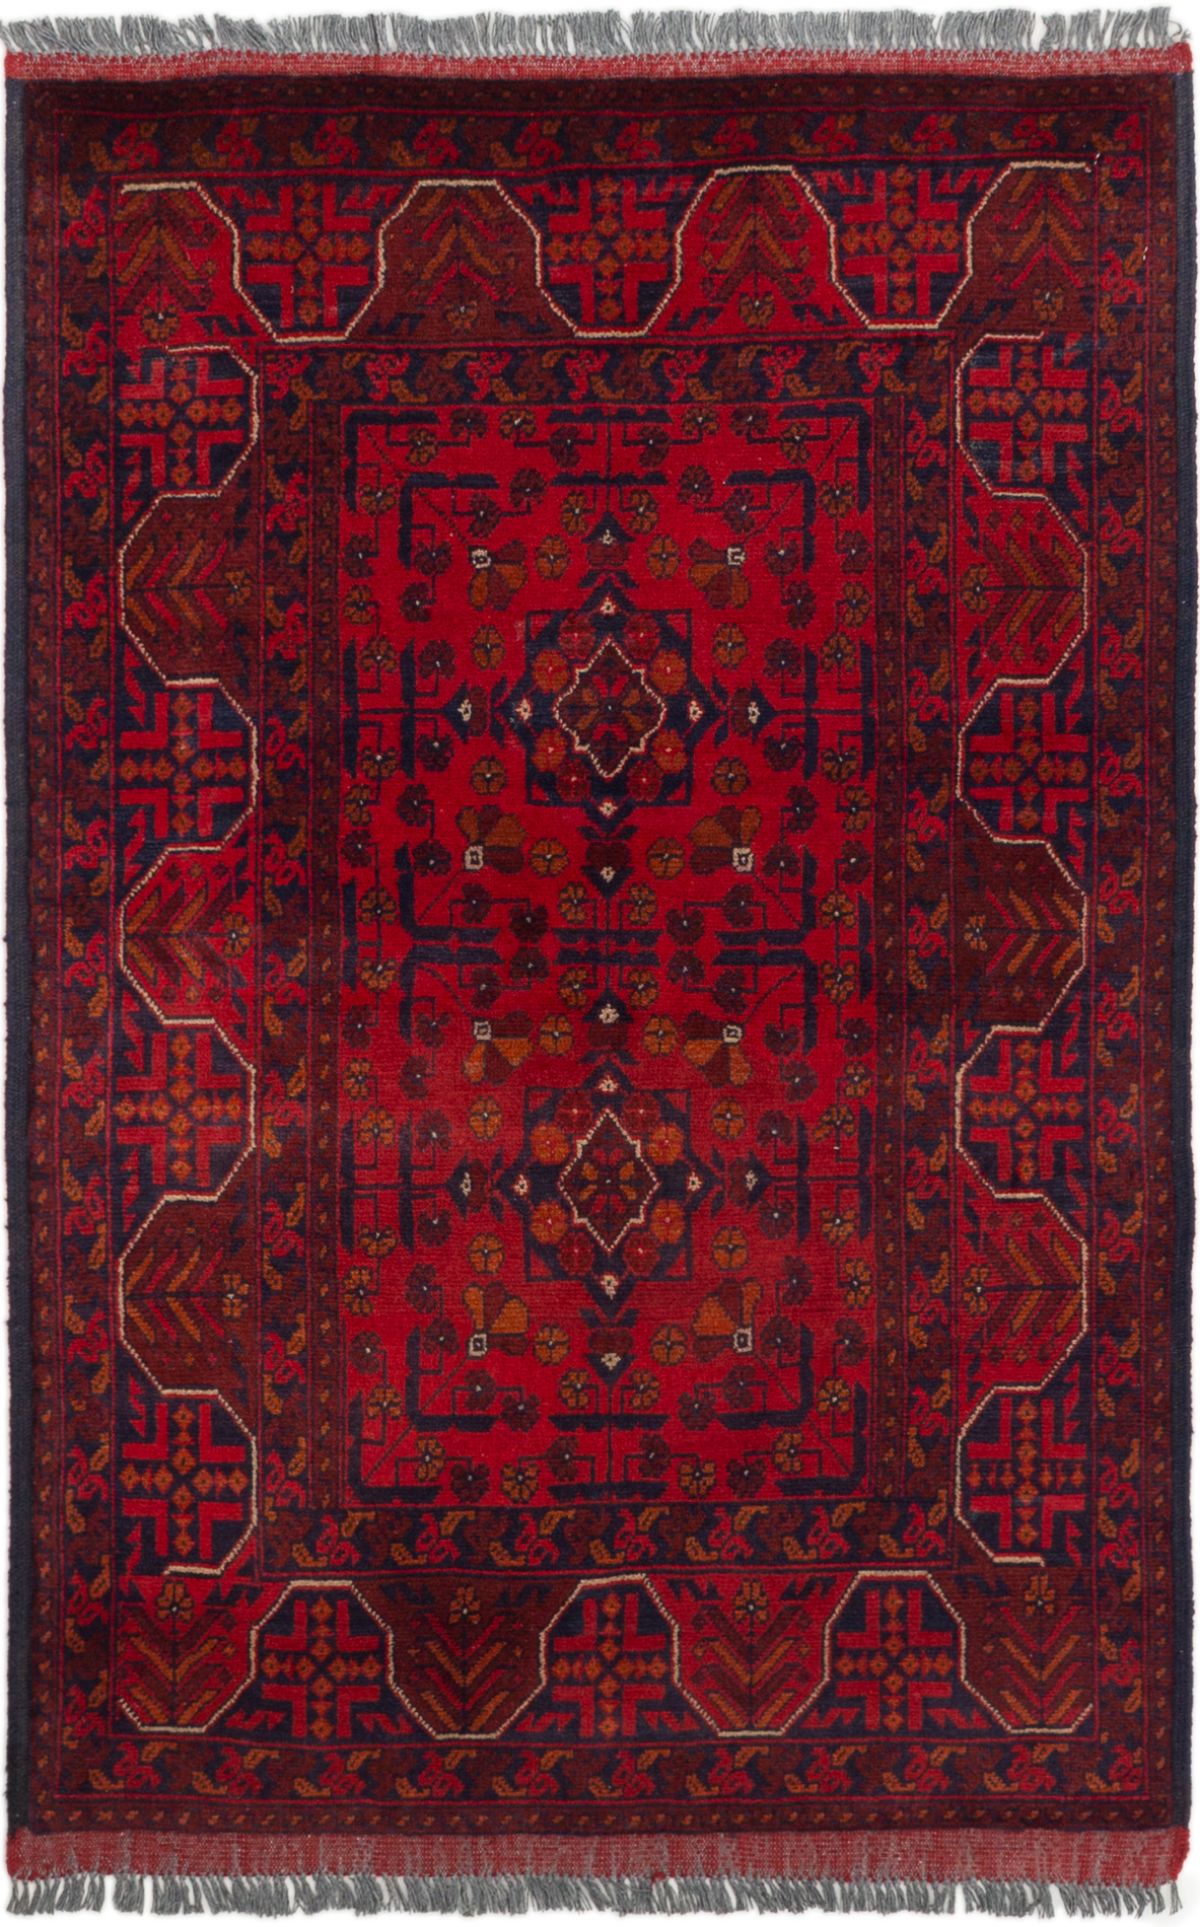 Hand-knotted Finest Khal Mohammadi Red Wool Rug 3'4" x 4'11" (15) Size: 3'4" x 4'11"  